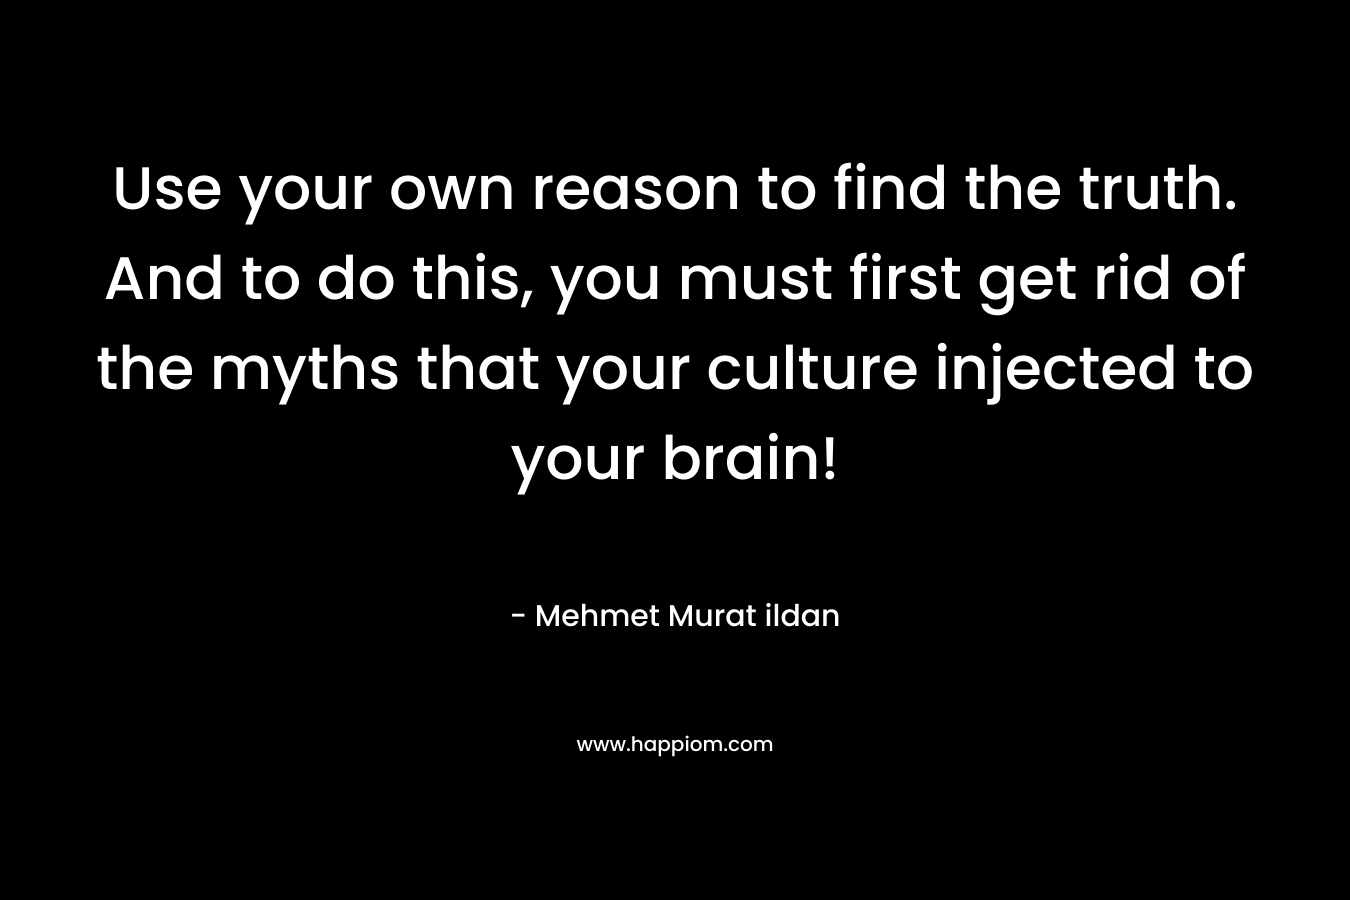 Use your own reason to find the truth. And to do this, you must first get rid of the myths that your culture injected to your brain!